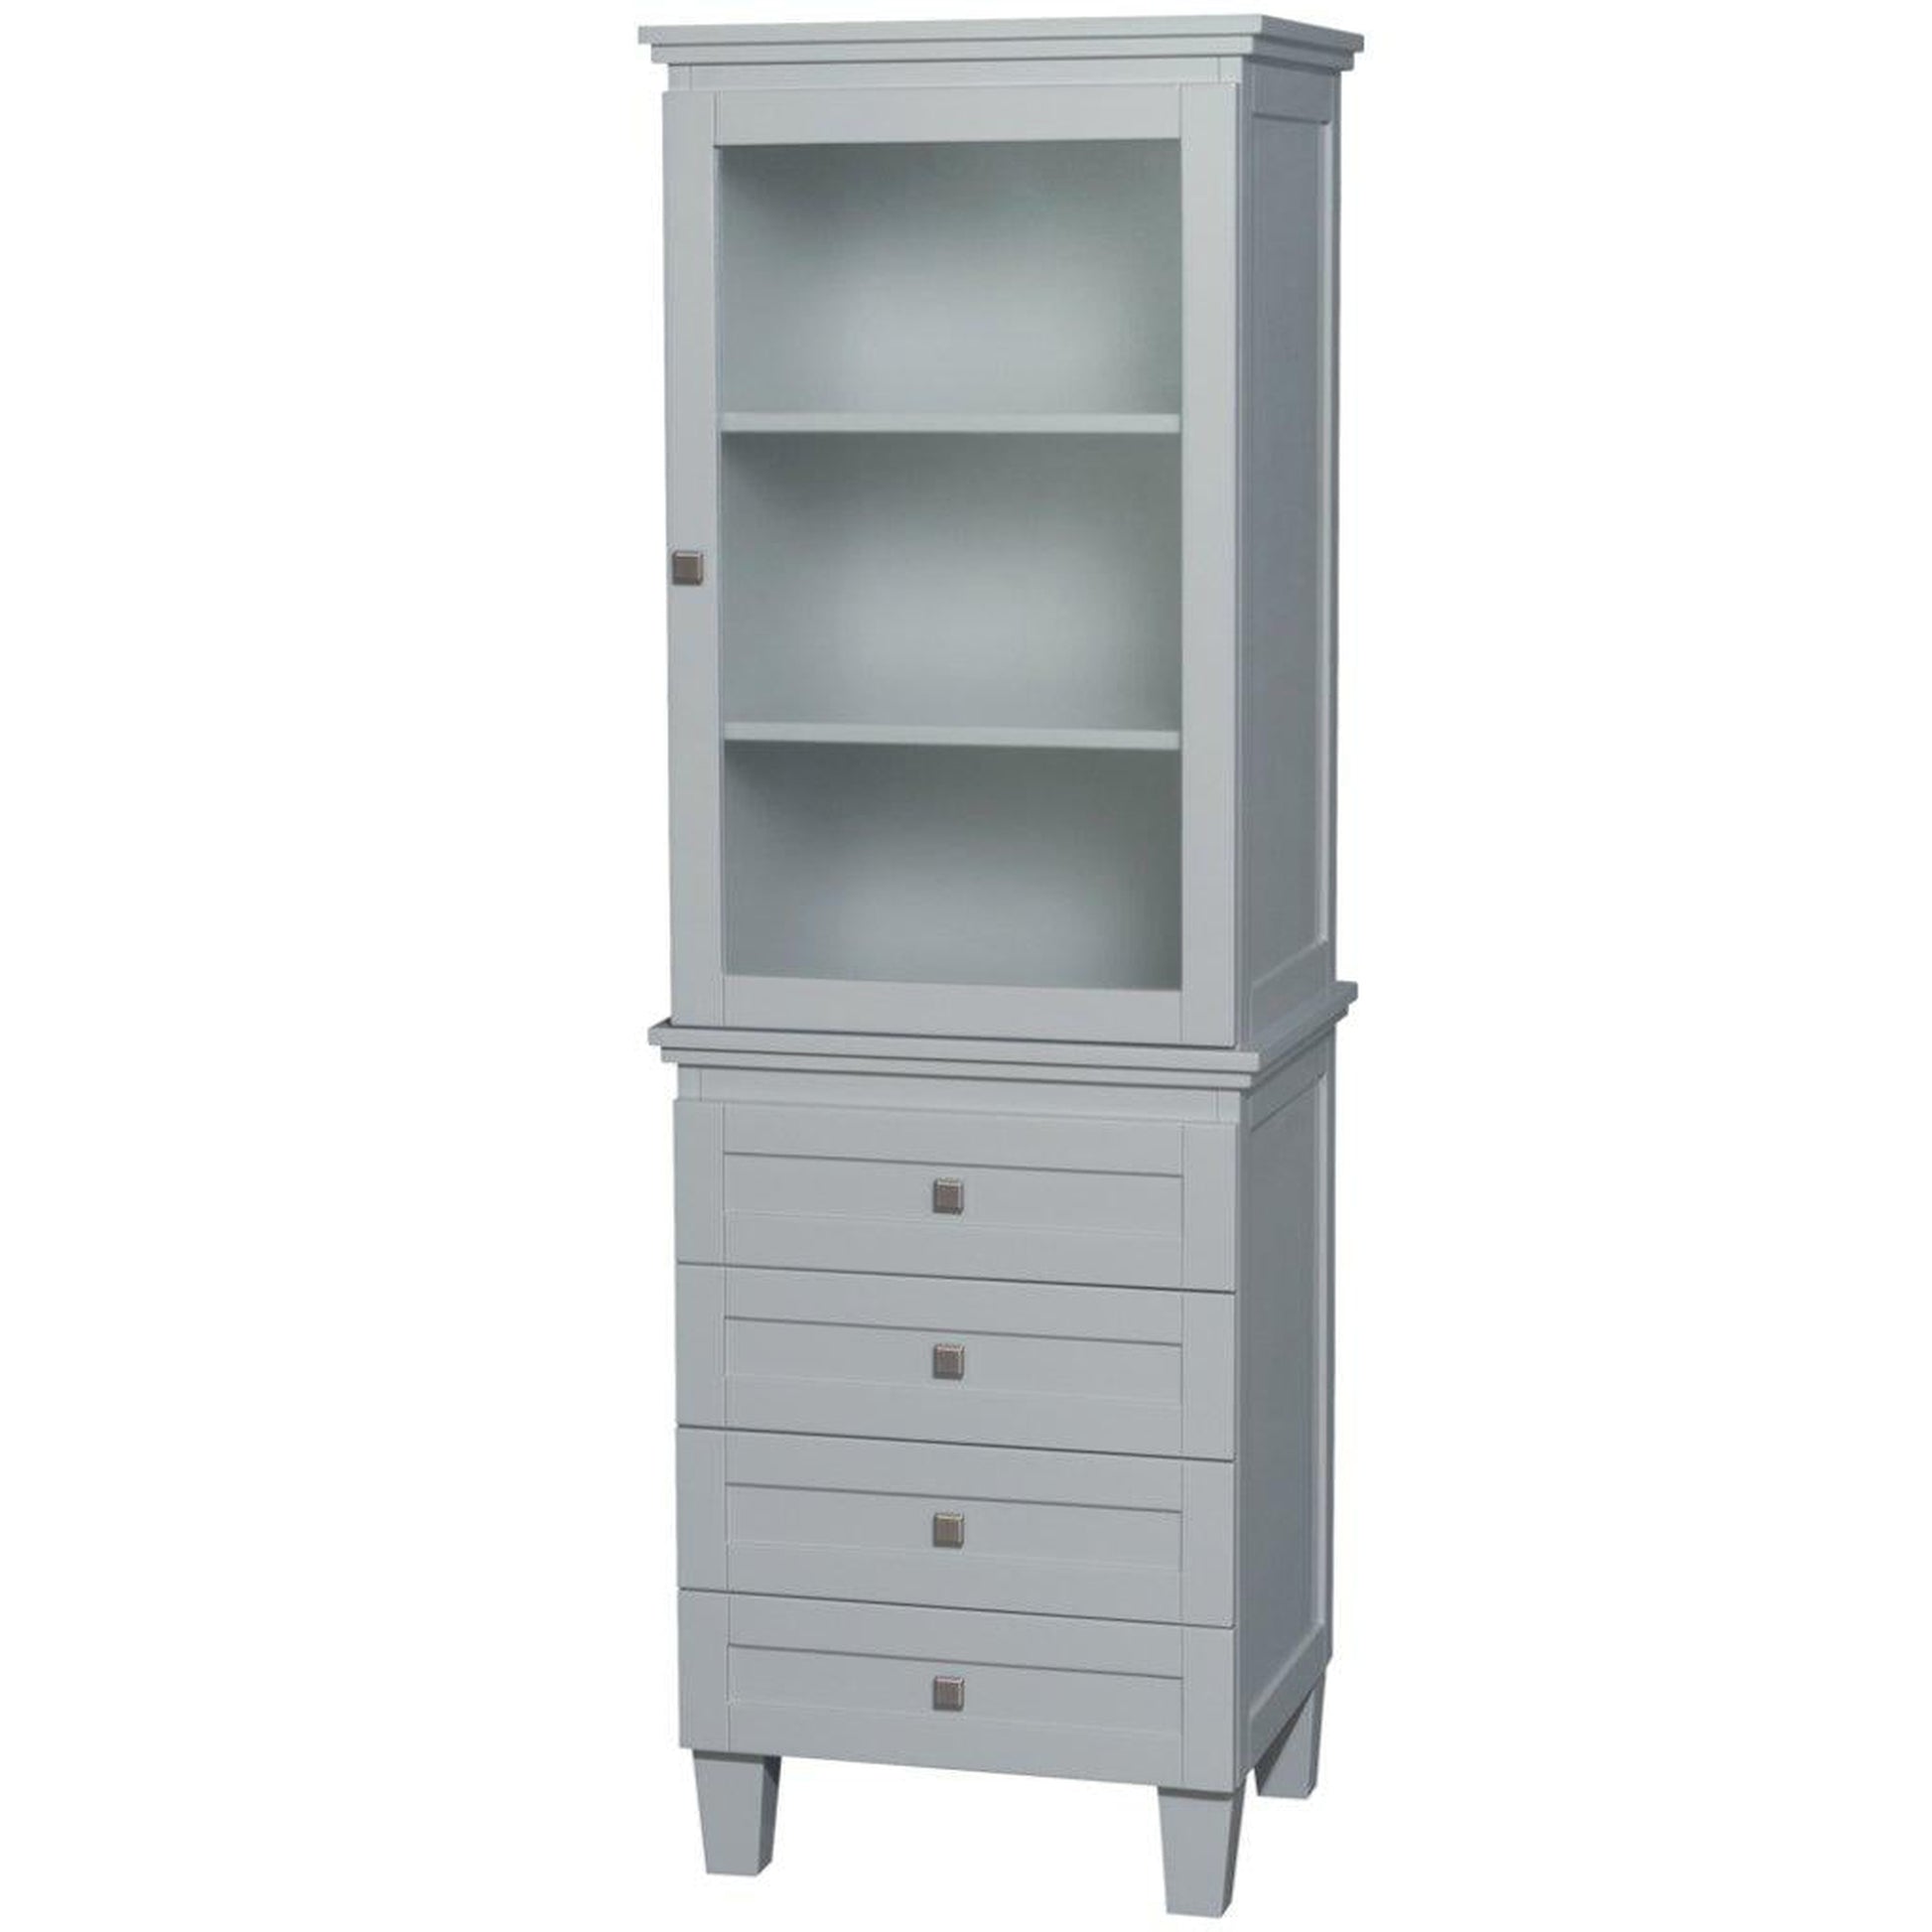 Wyndham Collection Acclaim Bathroom Linen Tower In Oyster Gray With Shelved Cabinet Storage And 4 Drawers